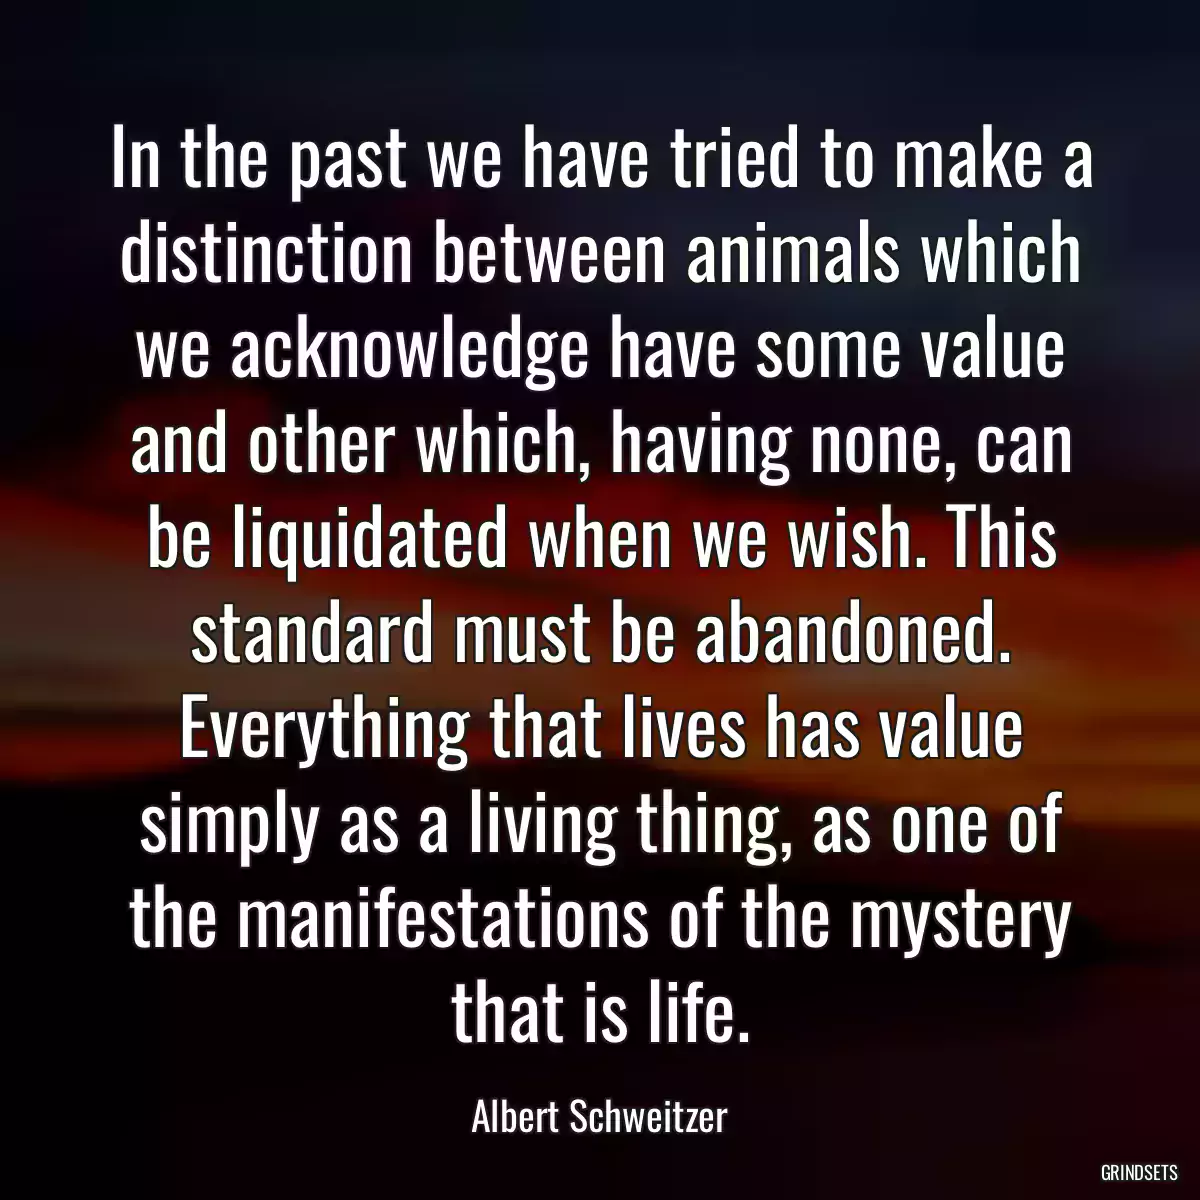 In the past we have tried to make a distinction between animals which we acknowledge have some value and other which, having none, can be liquidated when we wish. This standard must be abandoned. Everything that lives has value simply as a living thing, as one of the manifestations of the mystery that is life.